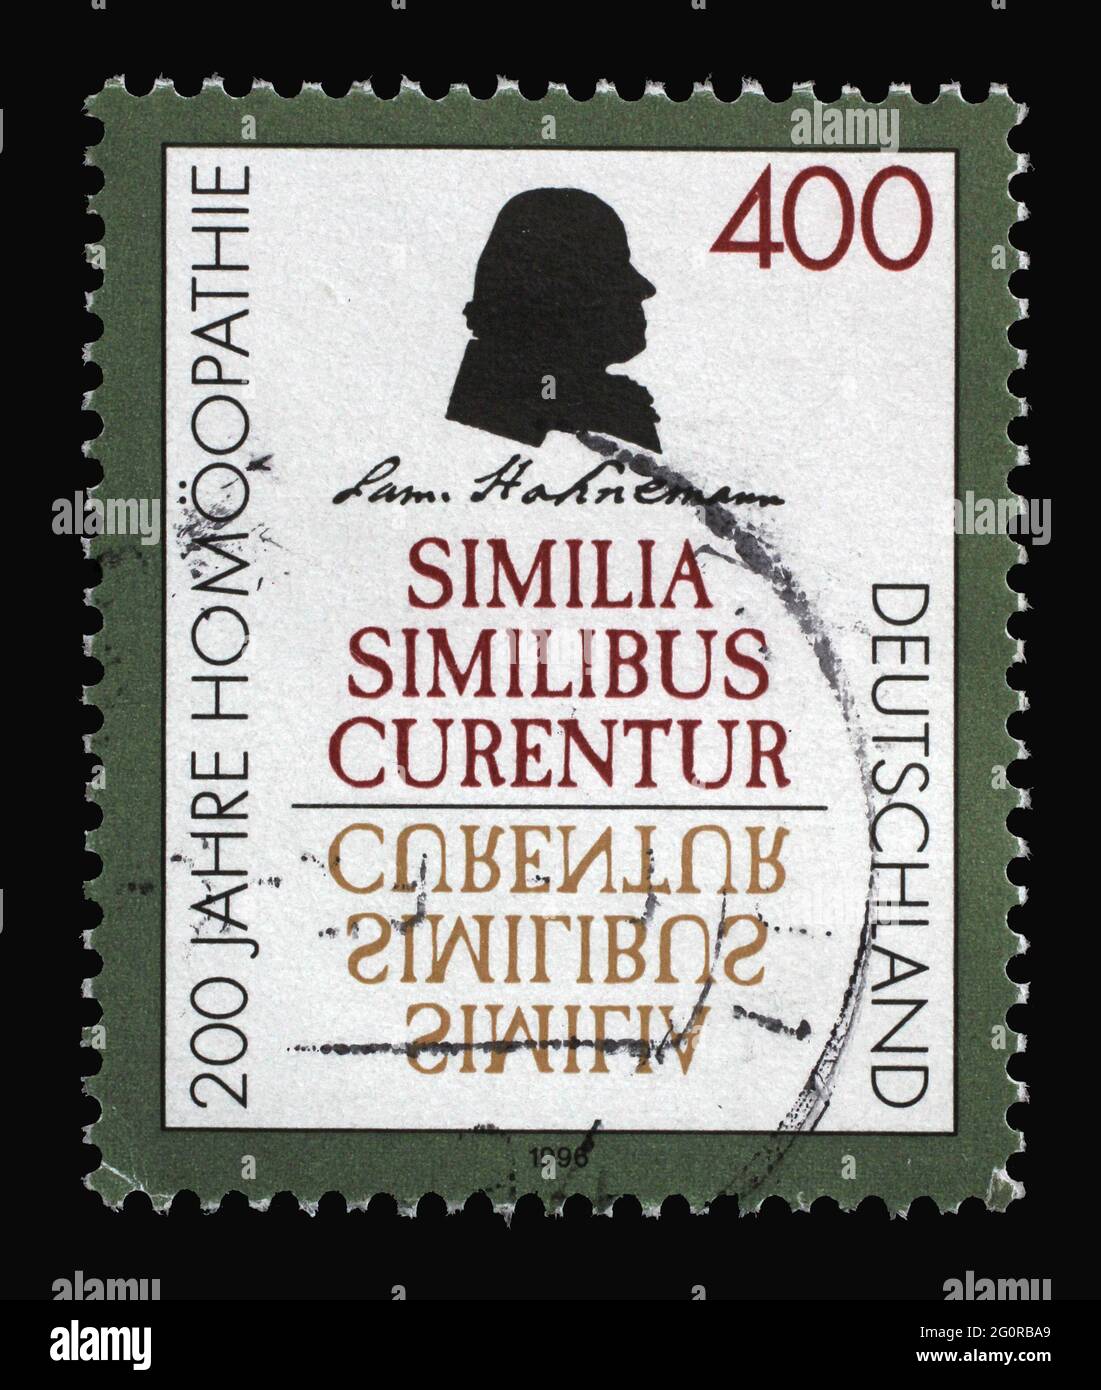 A stamp printed in Germany shows Samuel Hahnemann, German Physician known for Creating a System of Alternative Medicine Called Homeopathy, Bicentenary Stock Photo